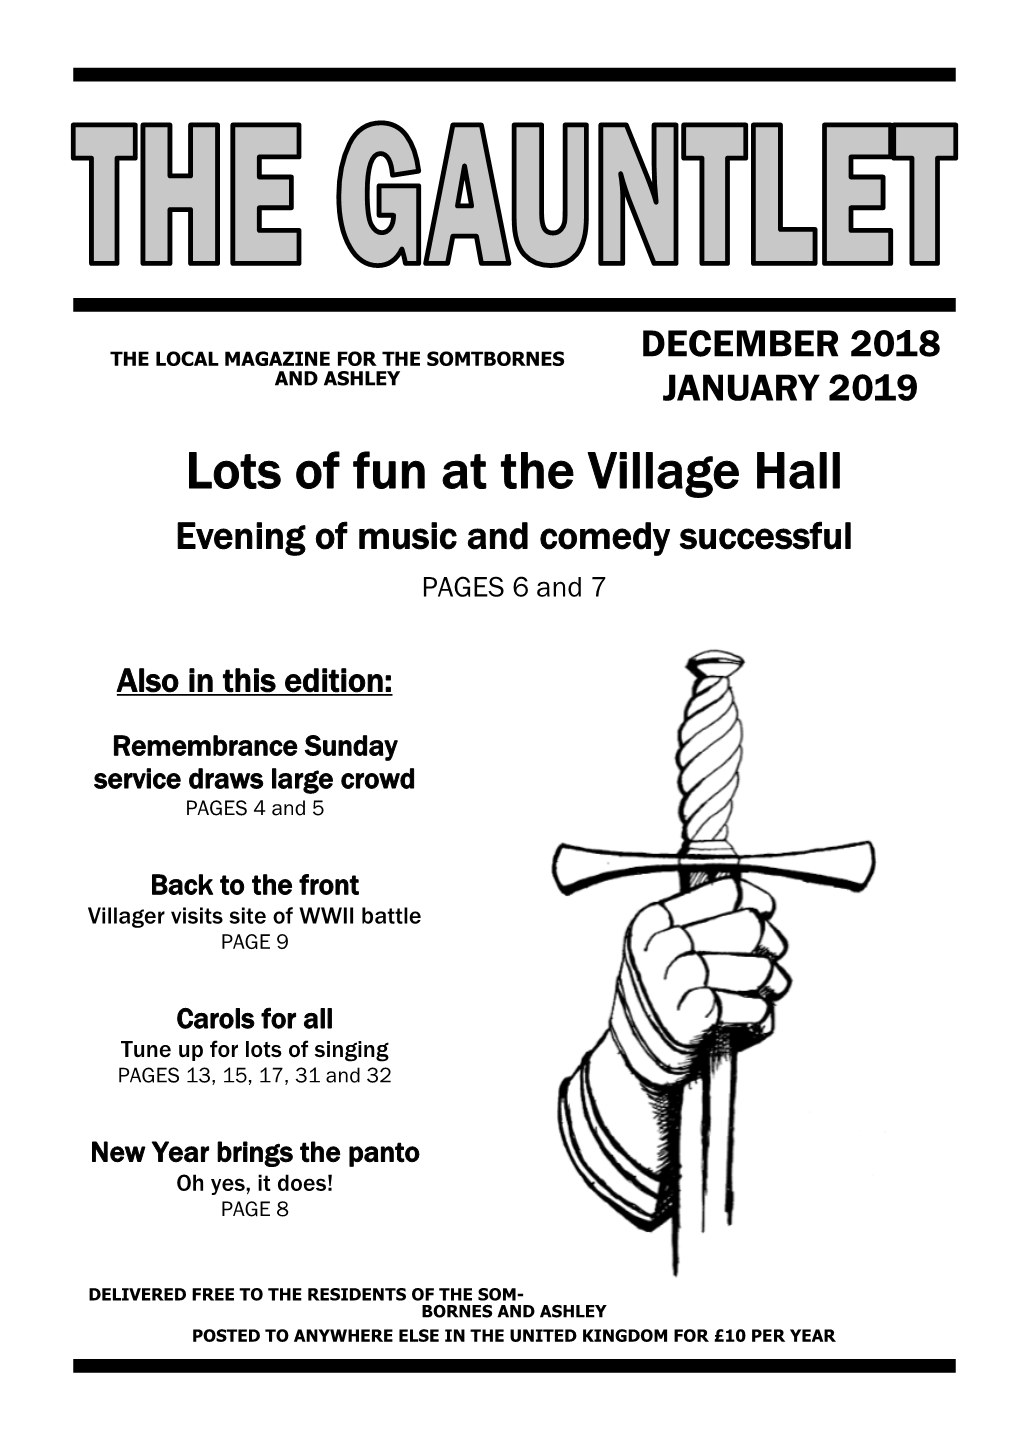 Lots of Fun at the Village Hall Evening of Music and Comedy Successful PAGES 6 and 7